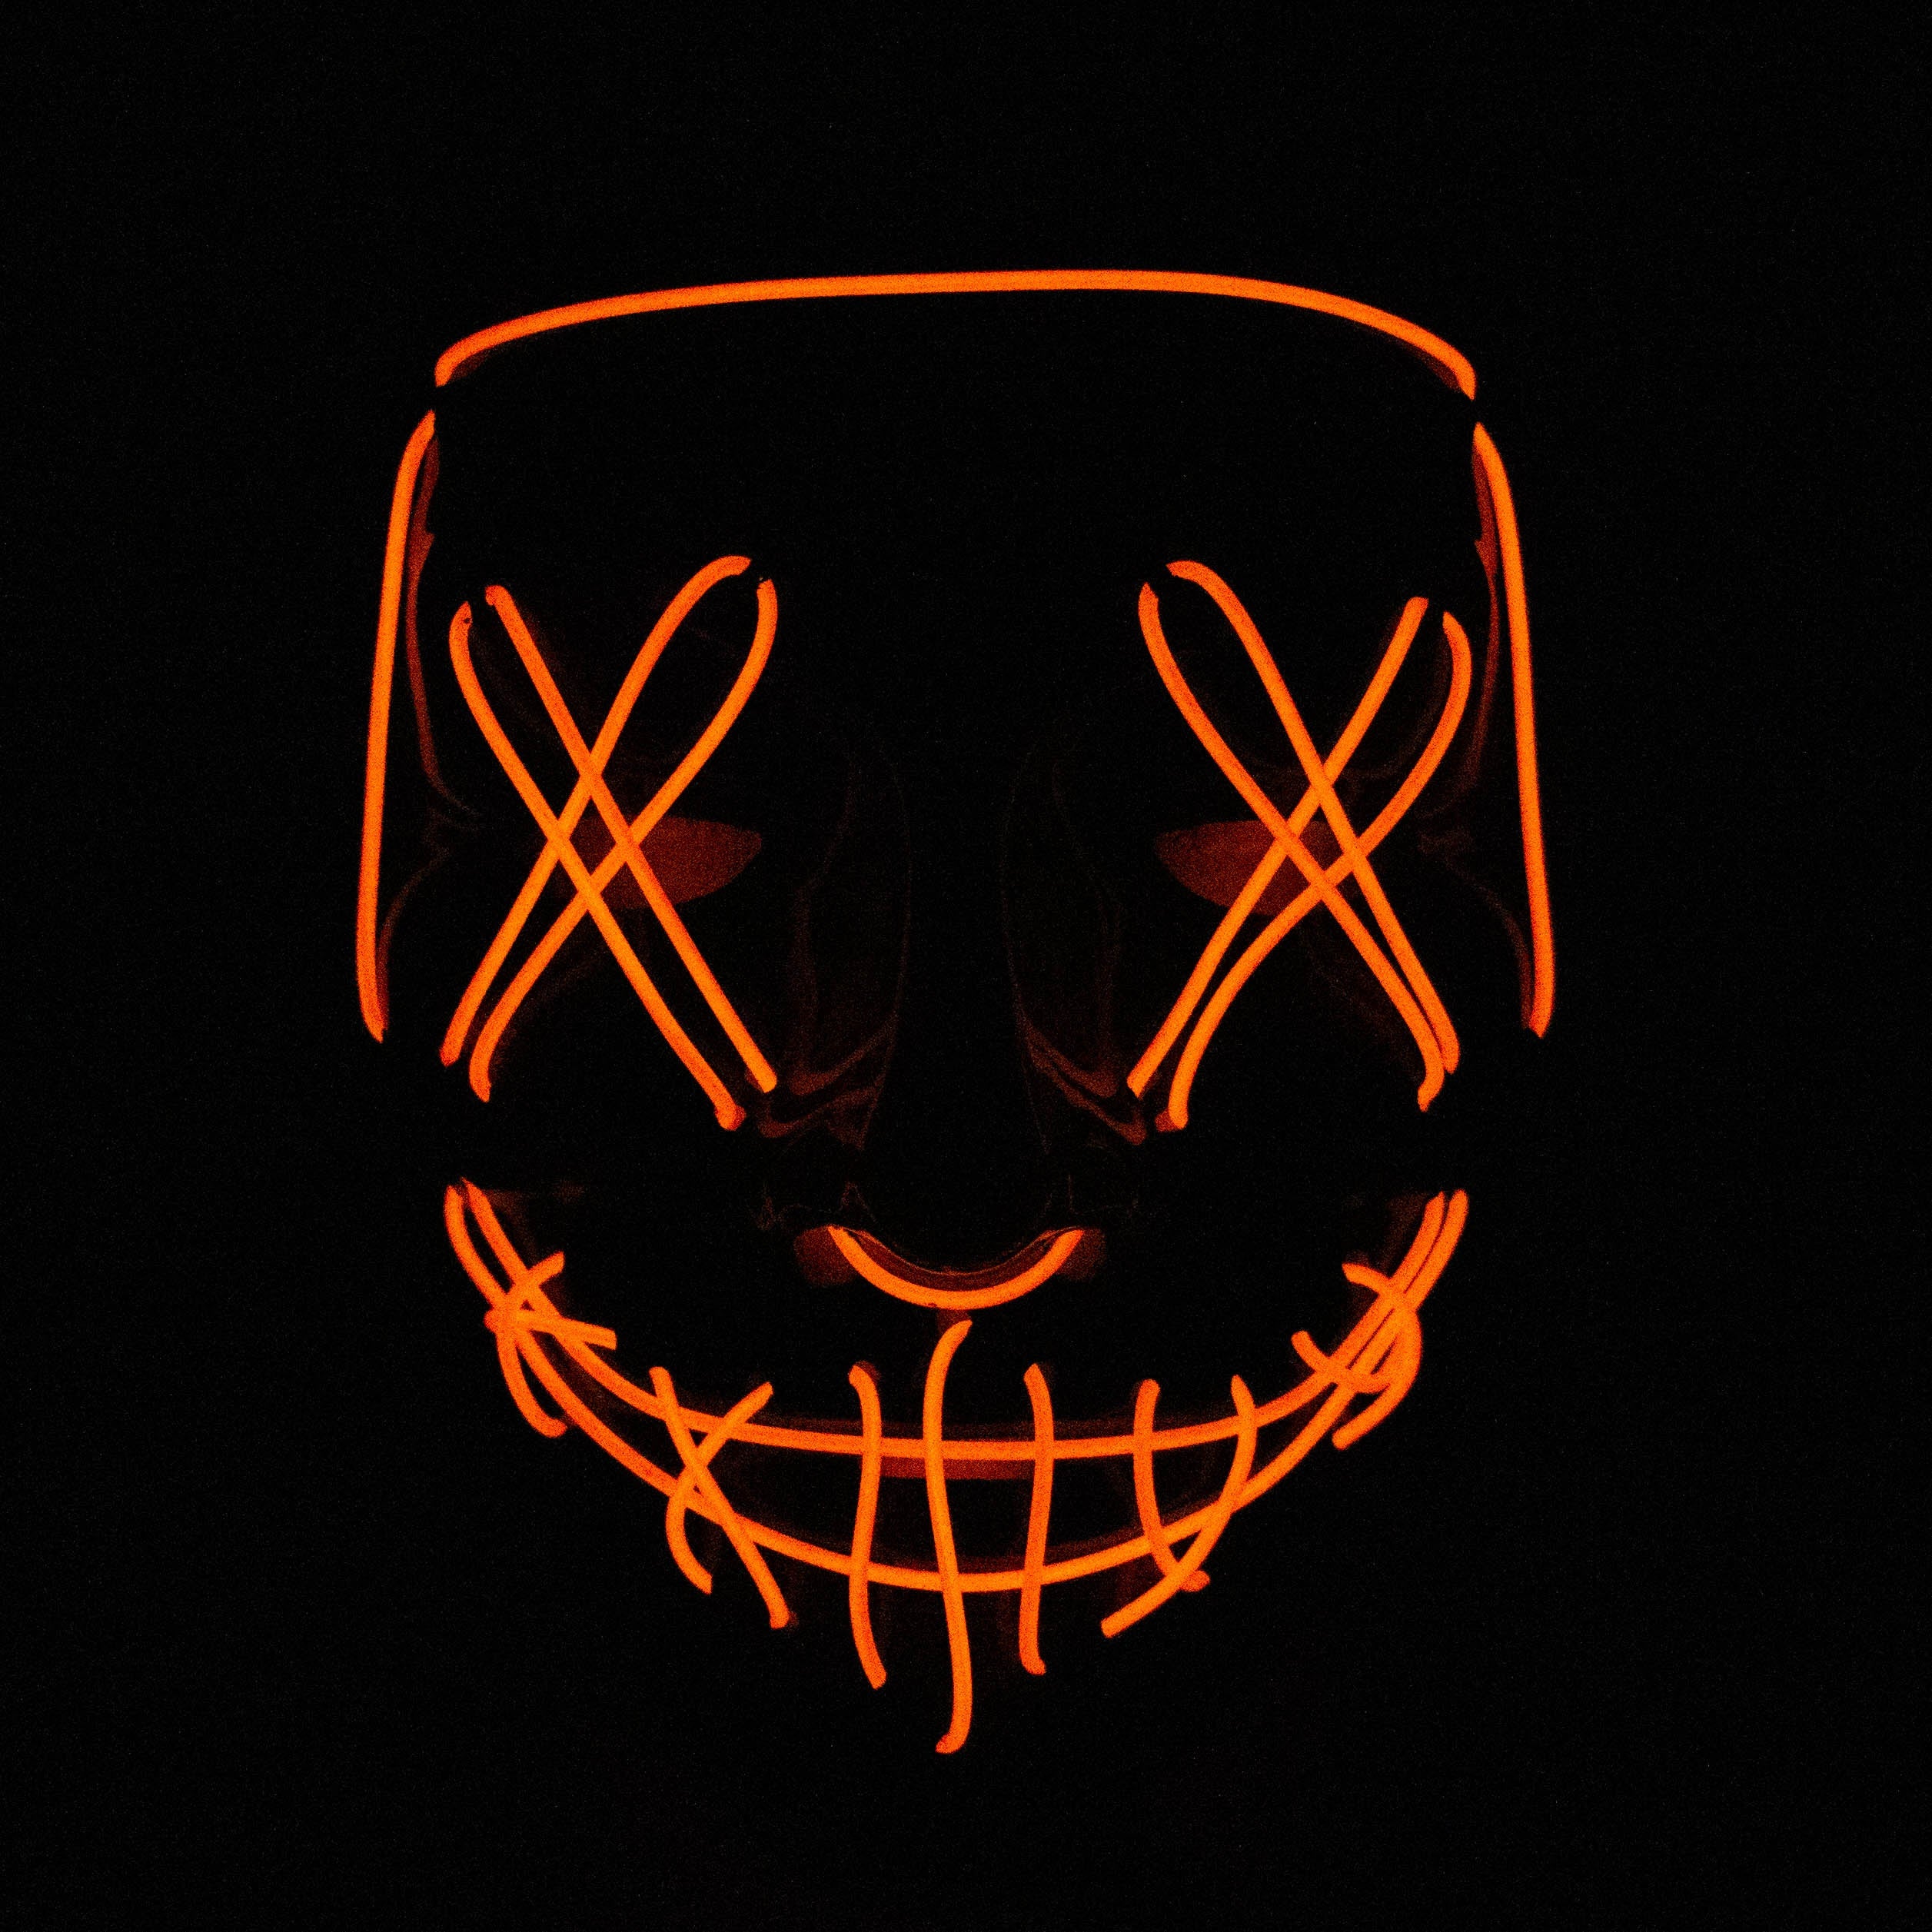 LED Neon Mask for party or Halloween Costume_12